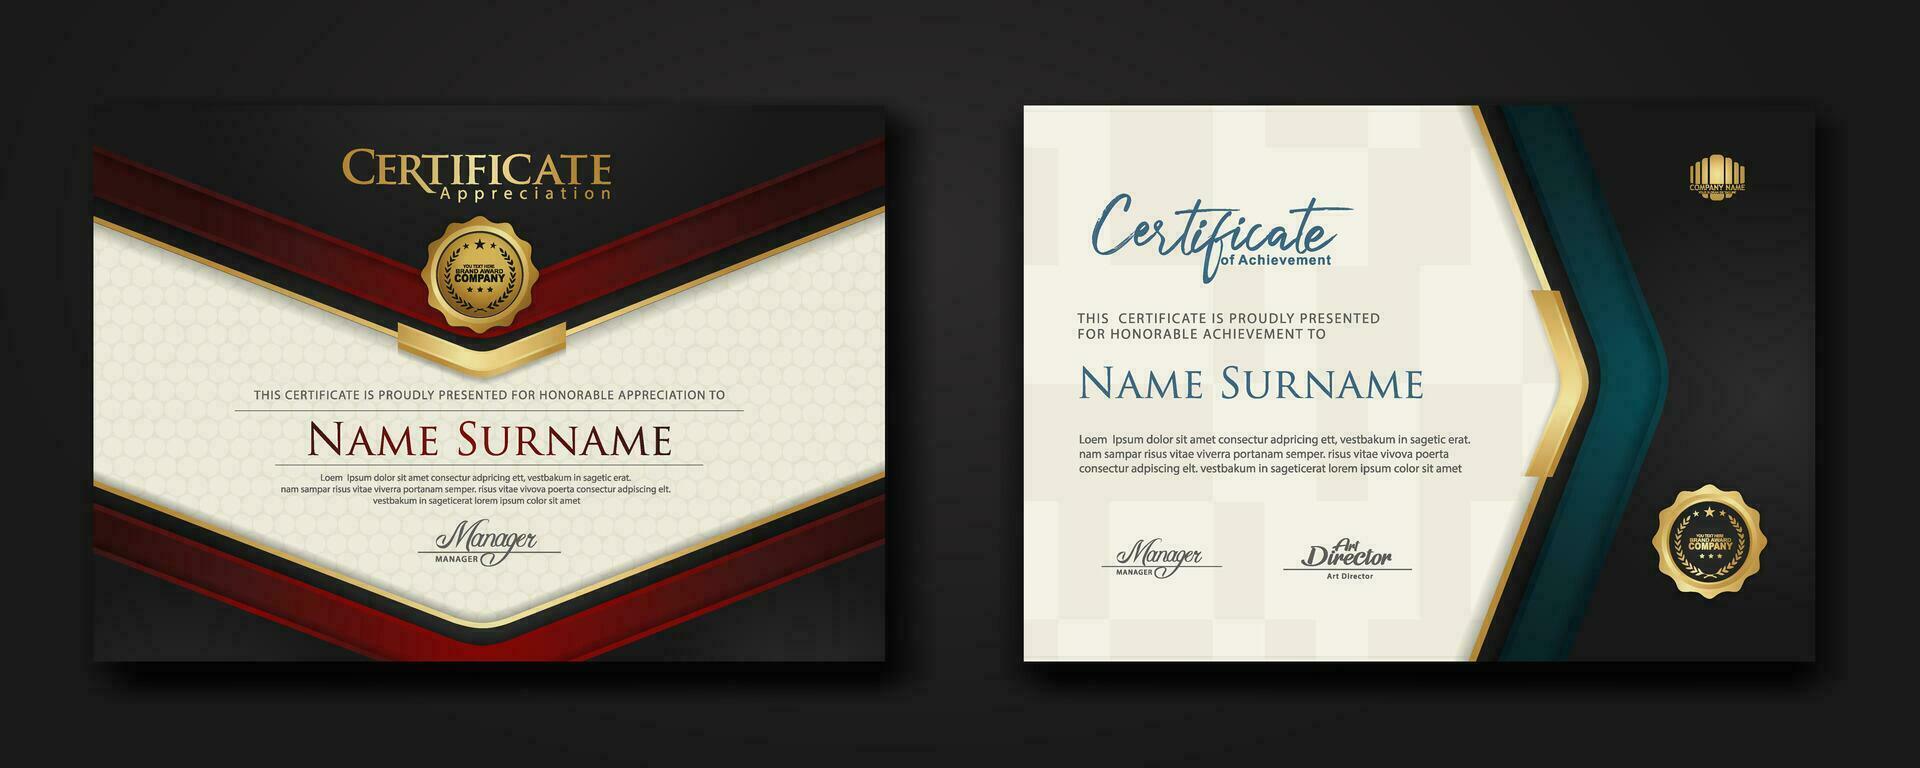 New design two set  luxury certificate  template with shadow effect on overlap layers and cream color on  pattern background vector